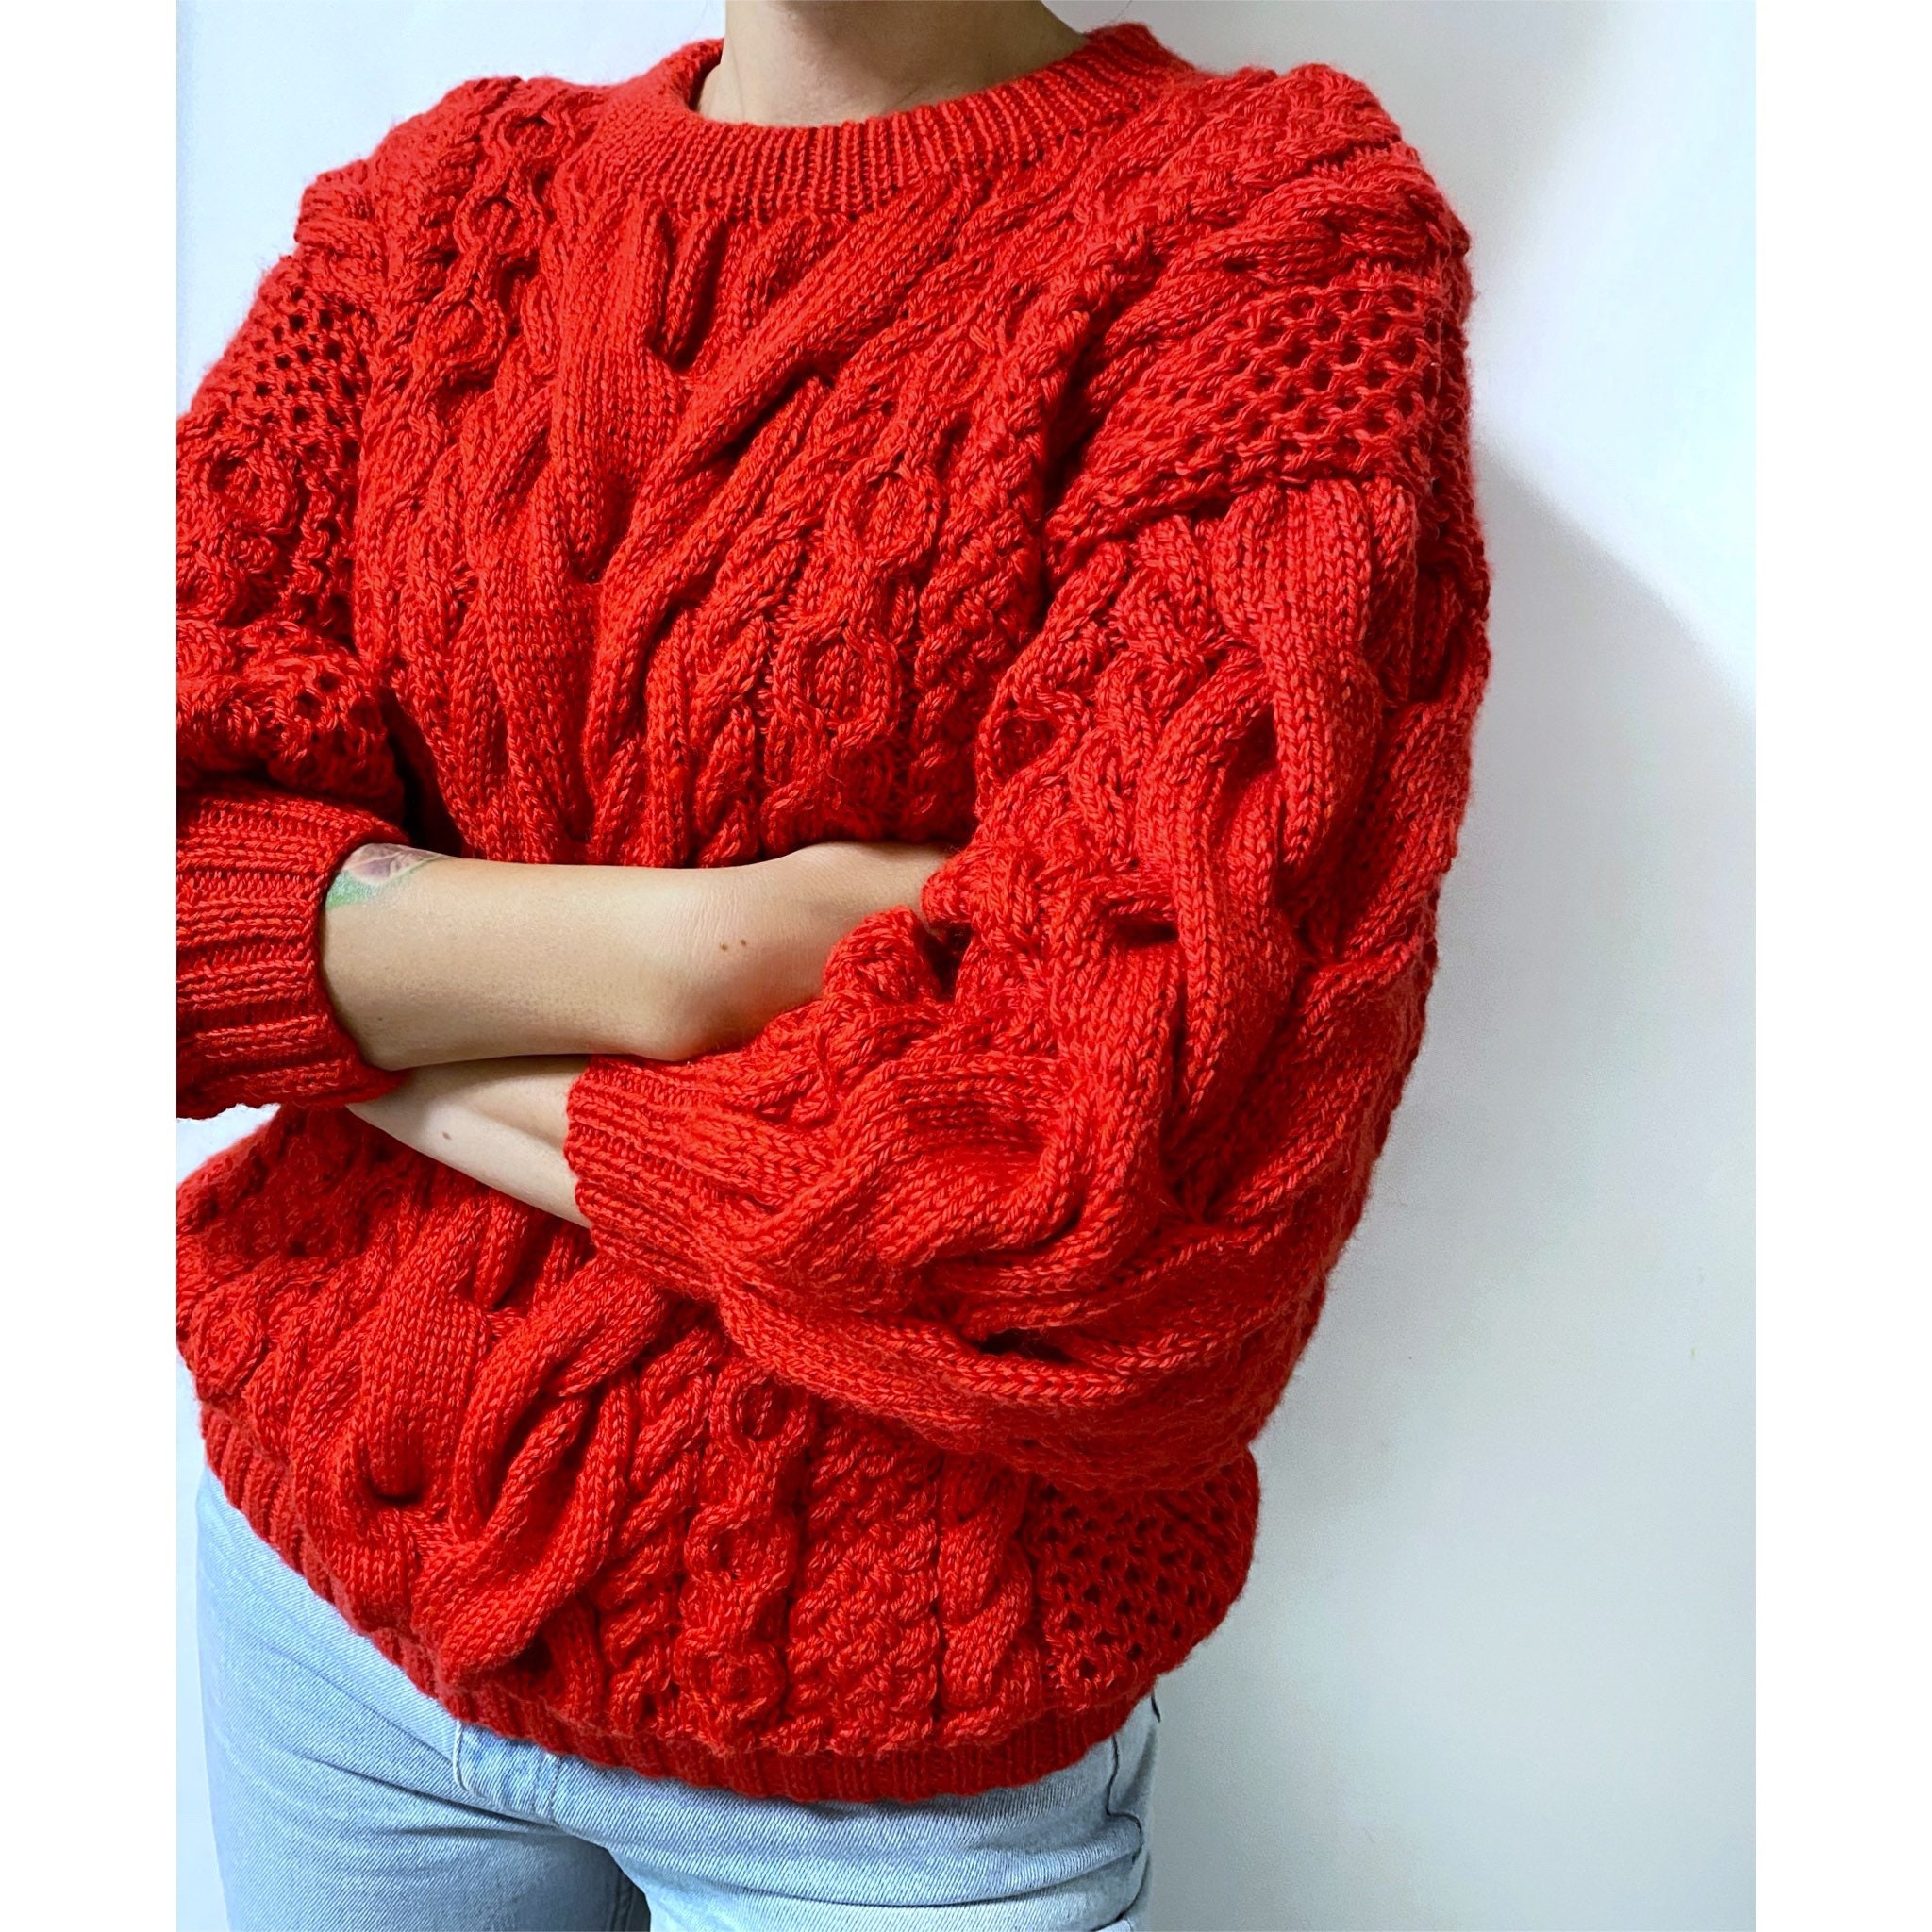 Red knit sweater women/knitted jumper/7/8 sleeve/Cable knitting